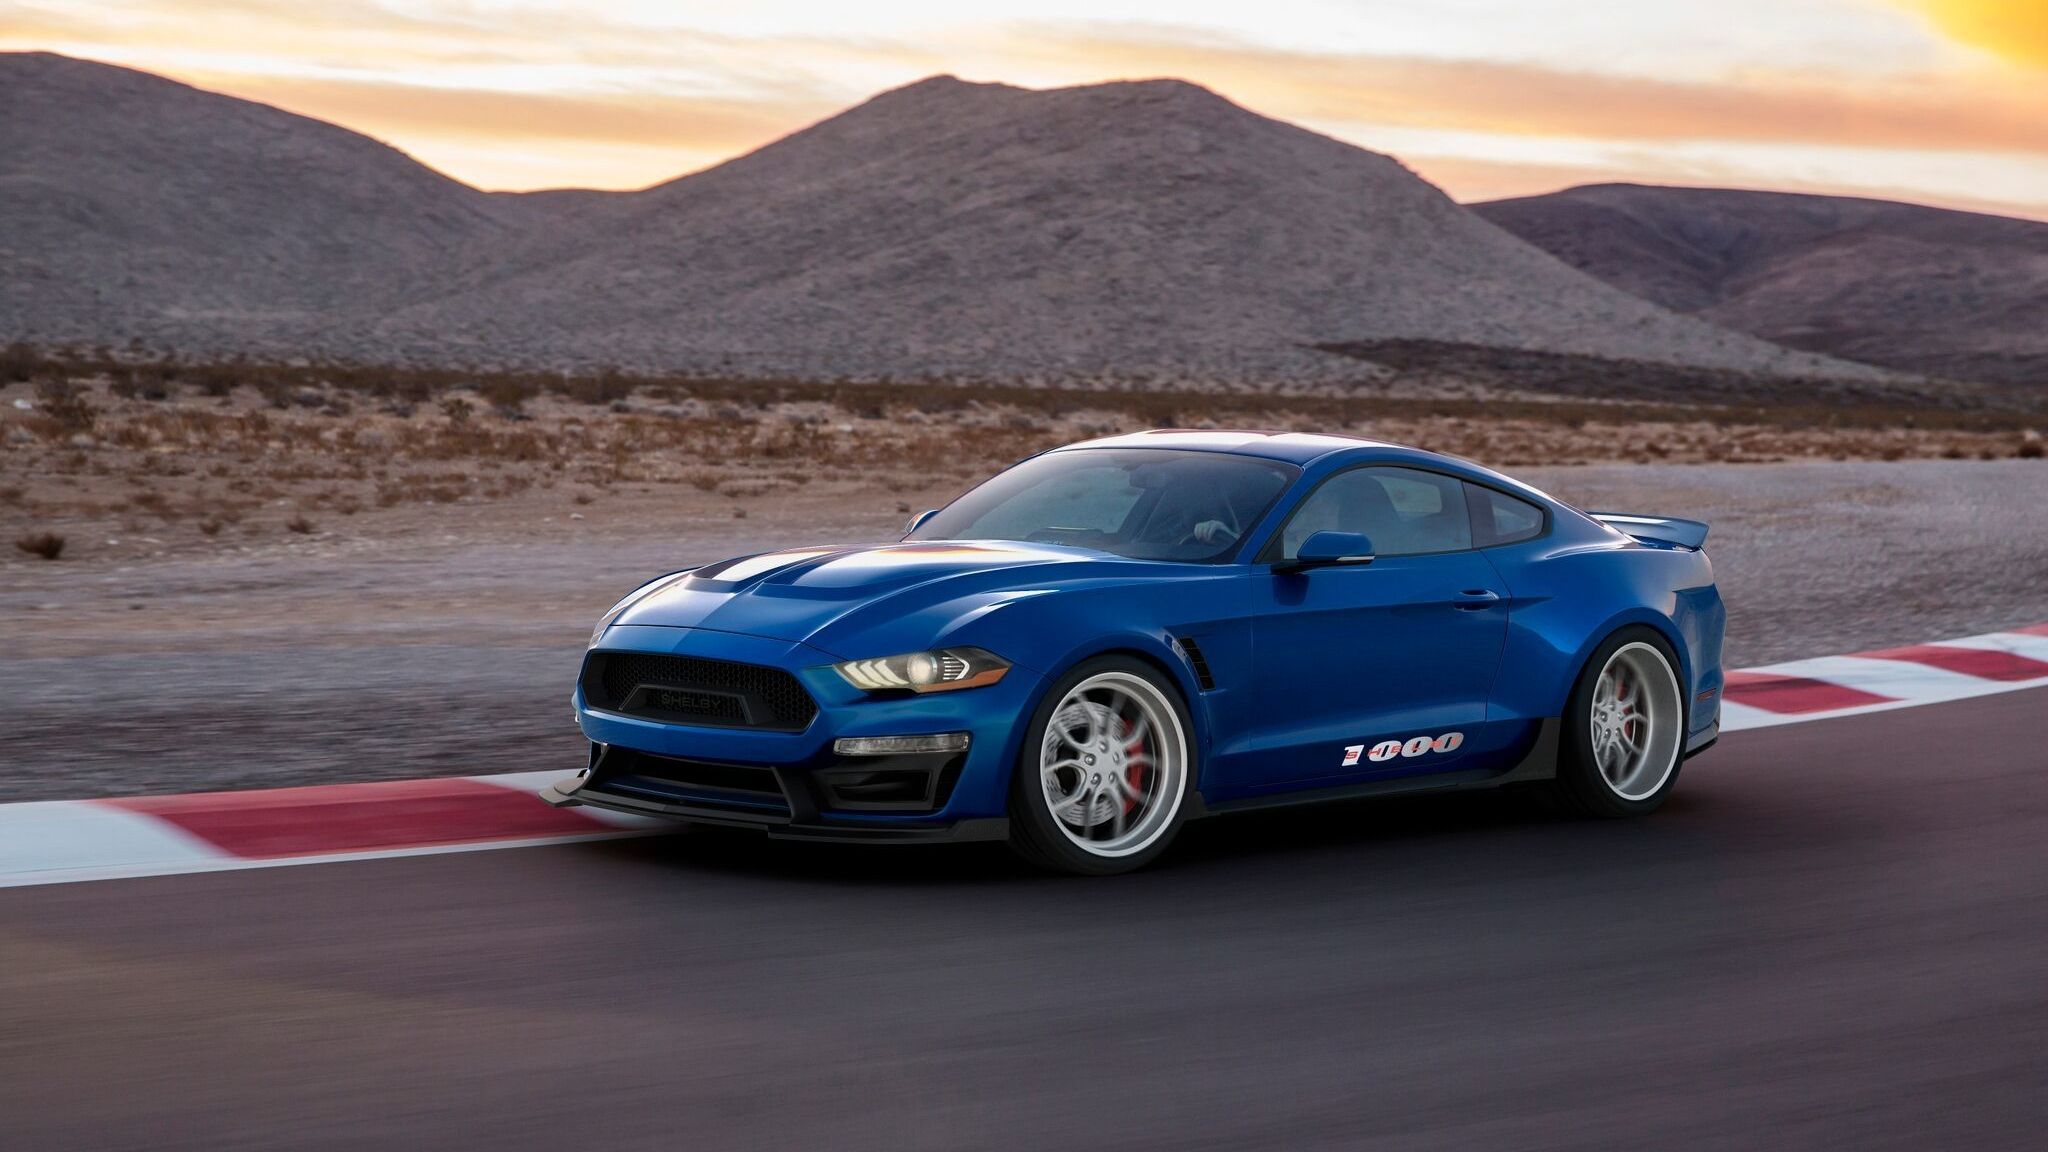 2018 Ford Shelby Mustang 1000